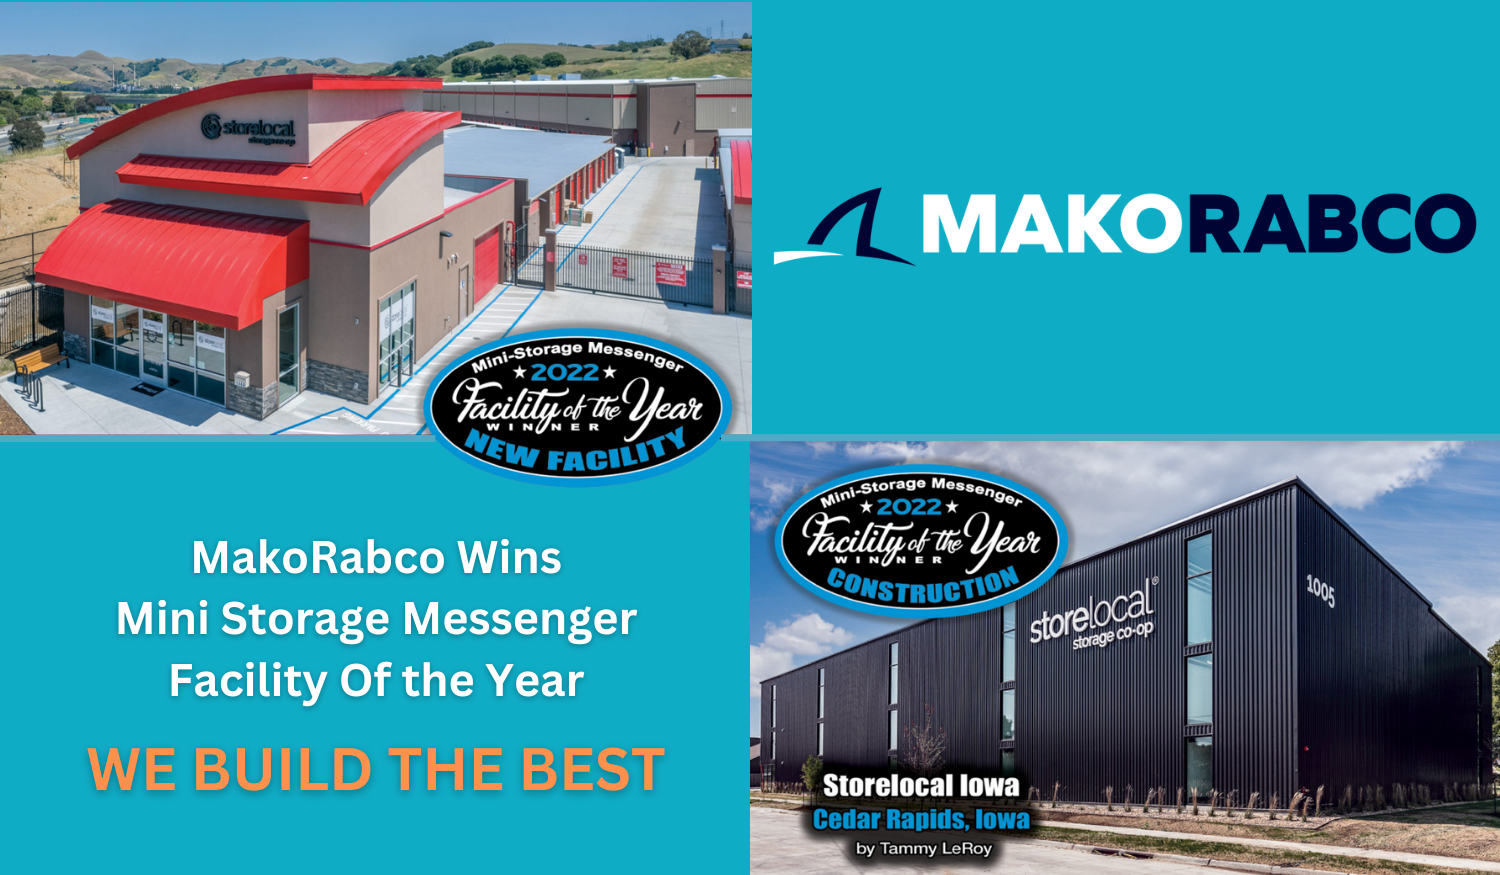 MakoRabco Wins Mini Storage Messenger Facility of the Year: We Build The Best